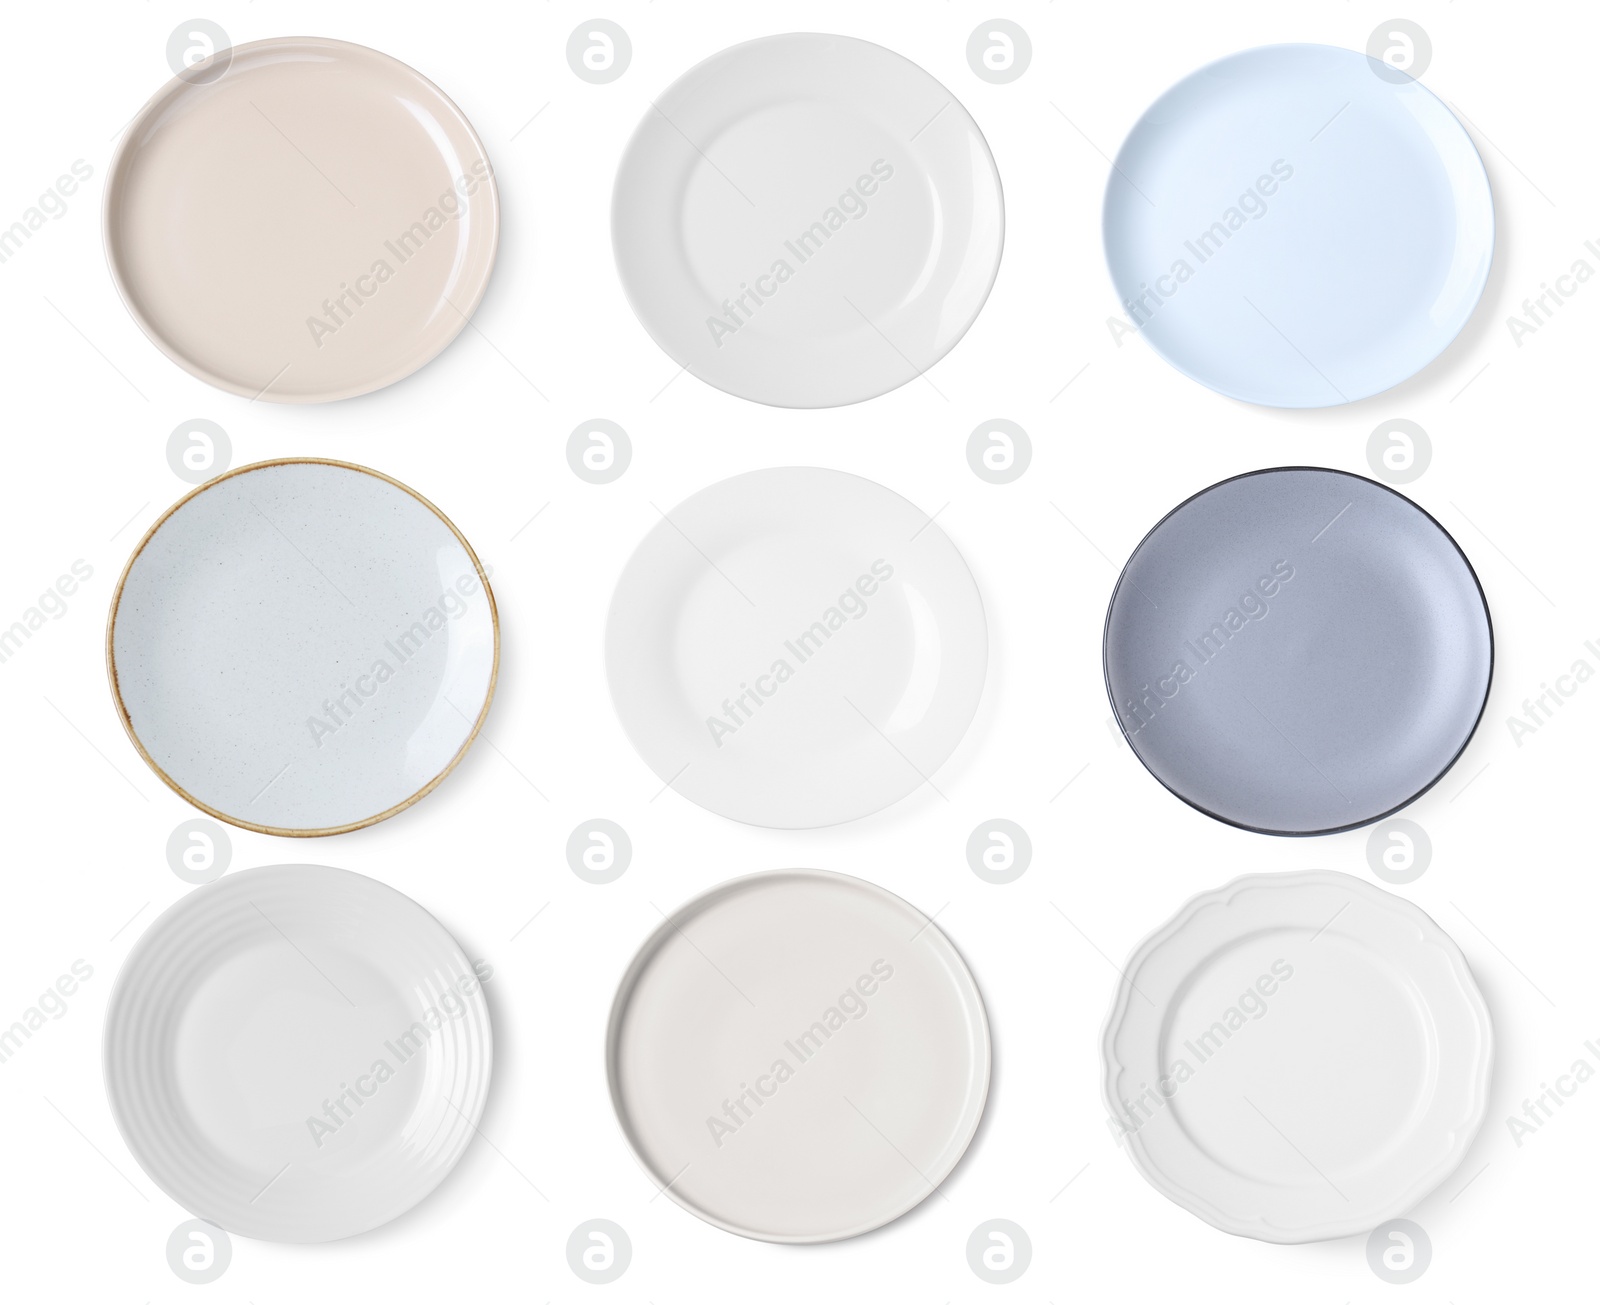 Image of Set of different ceramic plates on white background, top view